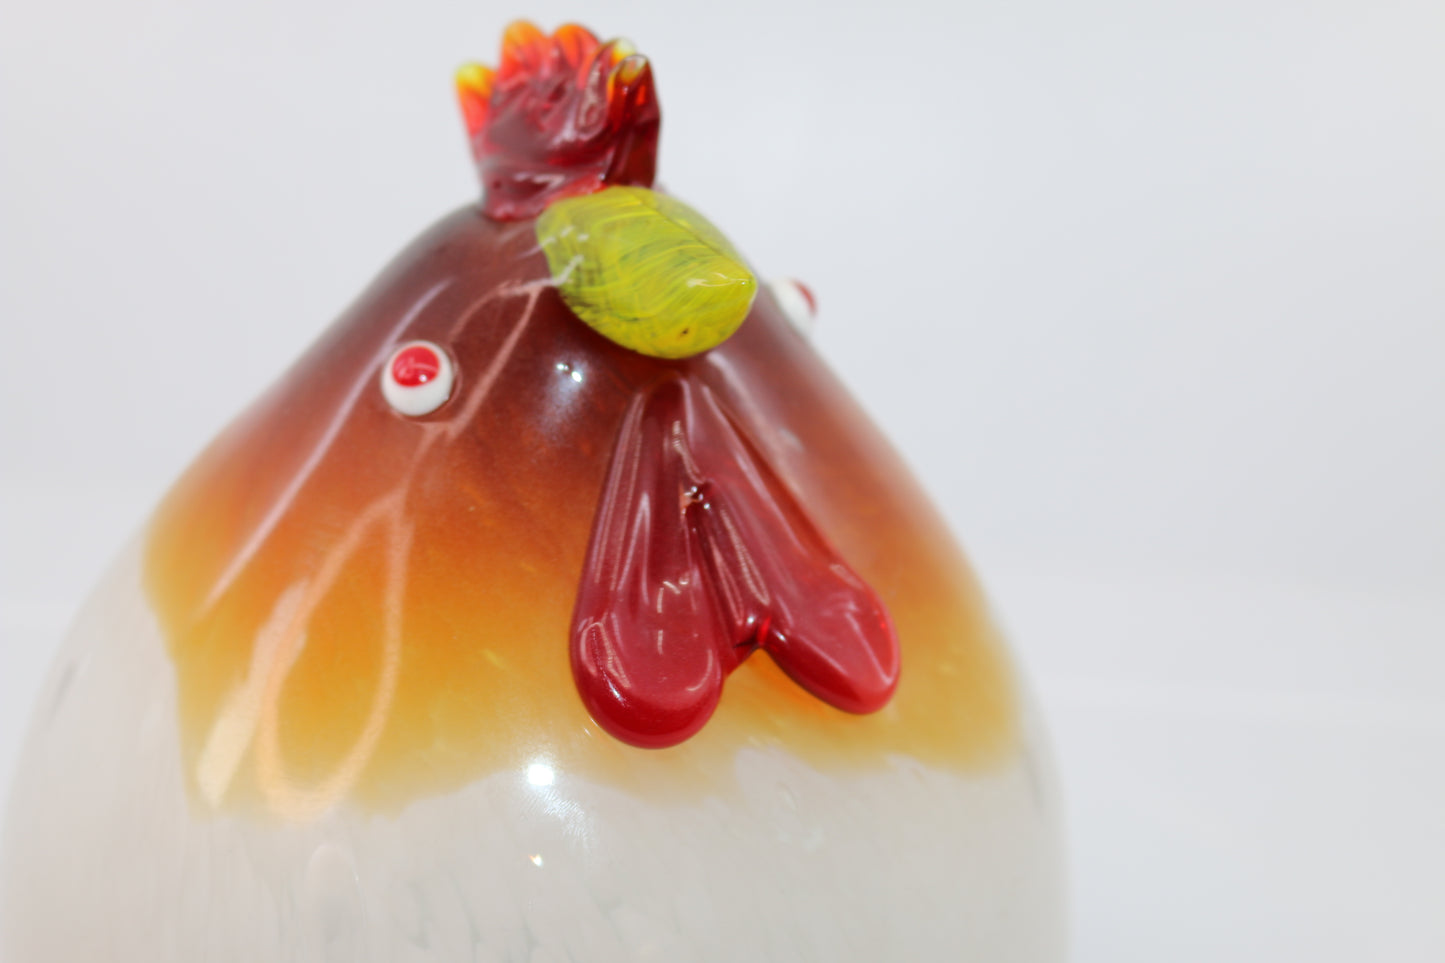 CHONKY hand blown art glass rooster heavy ~ 8" x 6" maybe vintage EPIC chicken